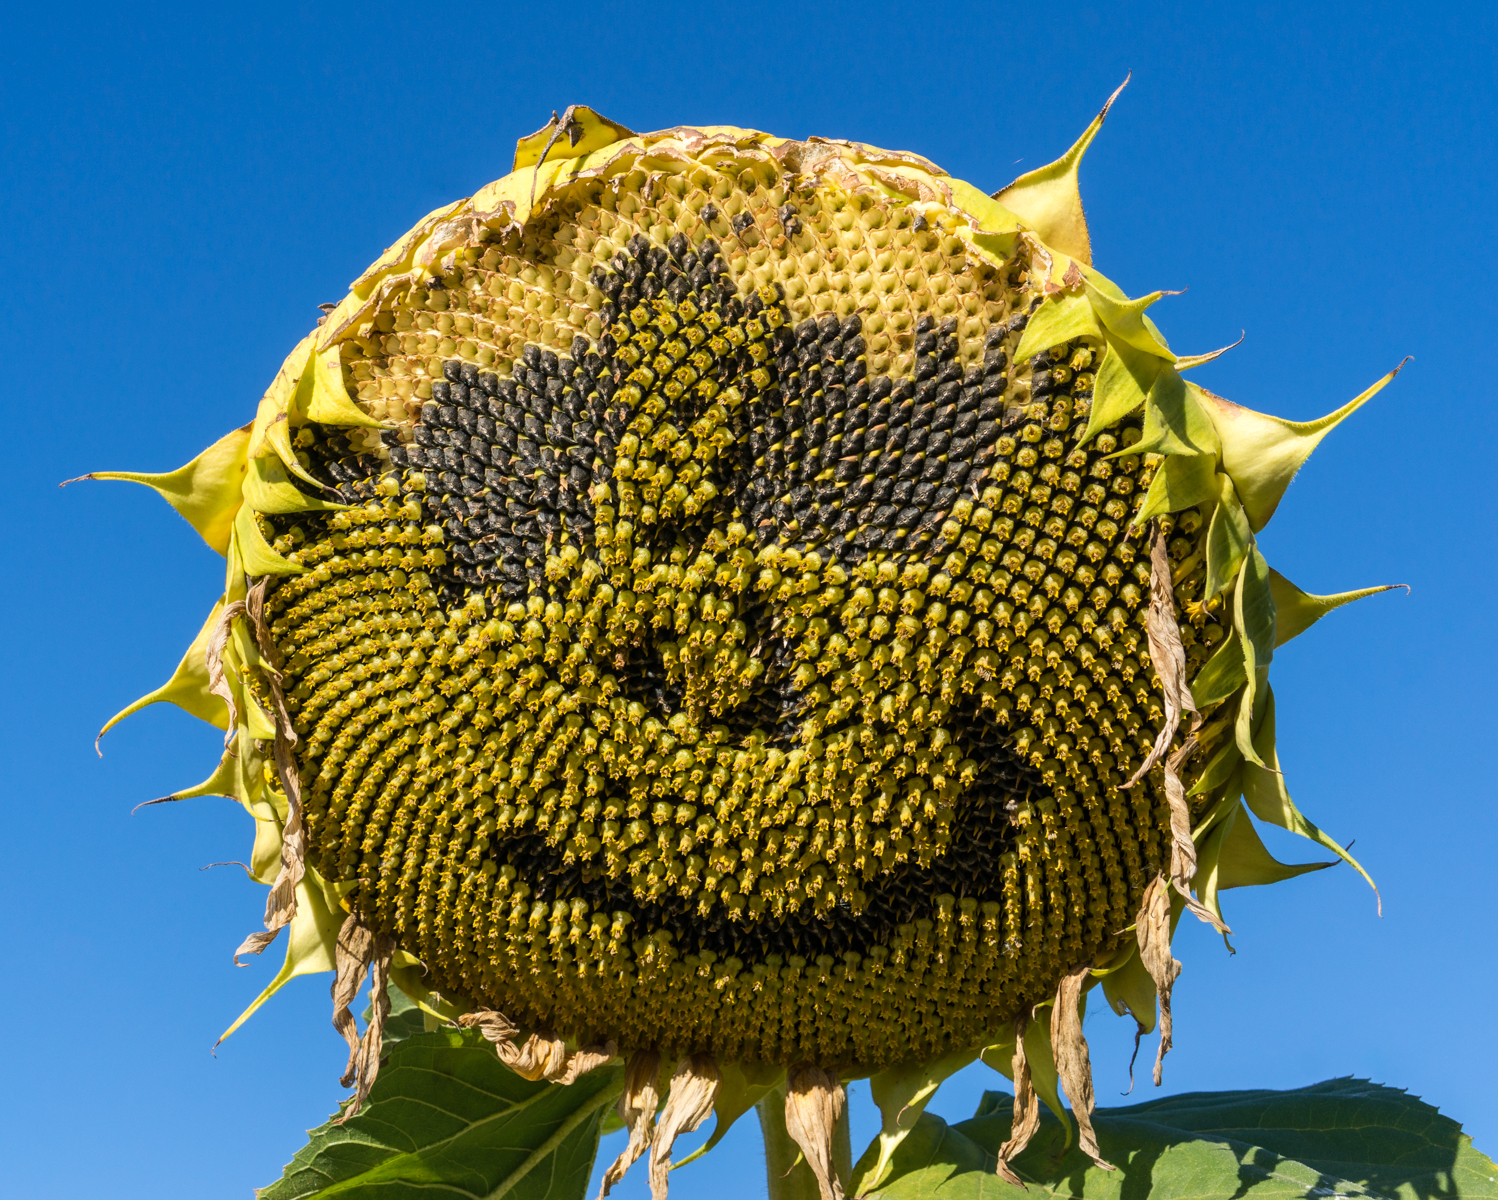 Human-altered sunflower in field adjacent to the Camino Francs | Photo by Mike Hudak